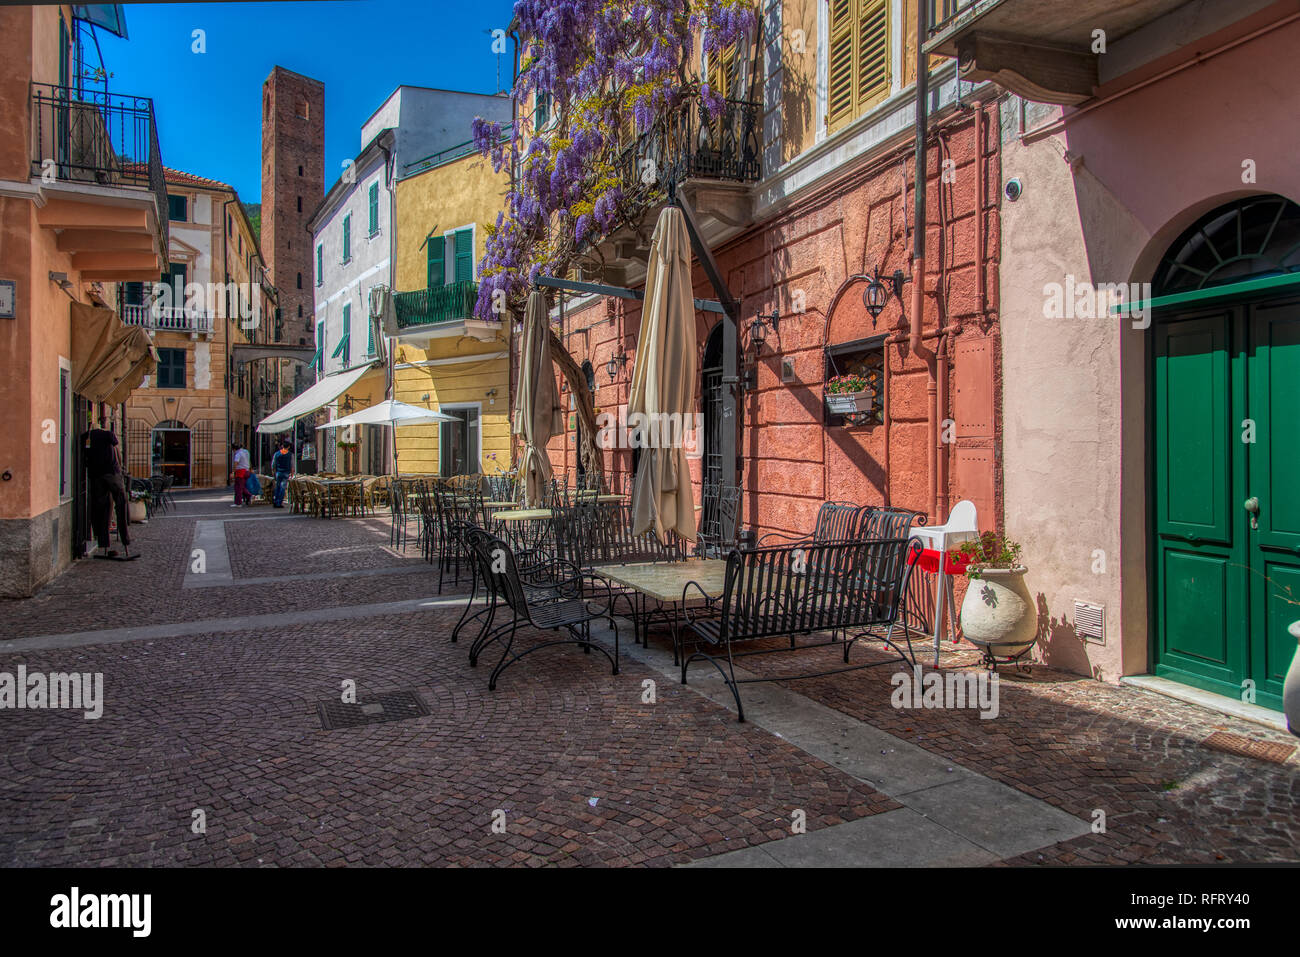 Colorful old buildings on a cobbled street with restaurant tables and chairs in Noli, Savona, Liguria, Italy in morning light Stock Photo